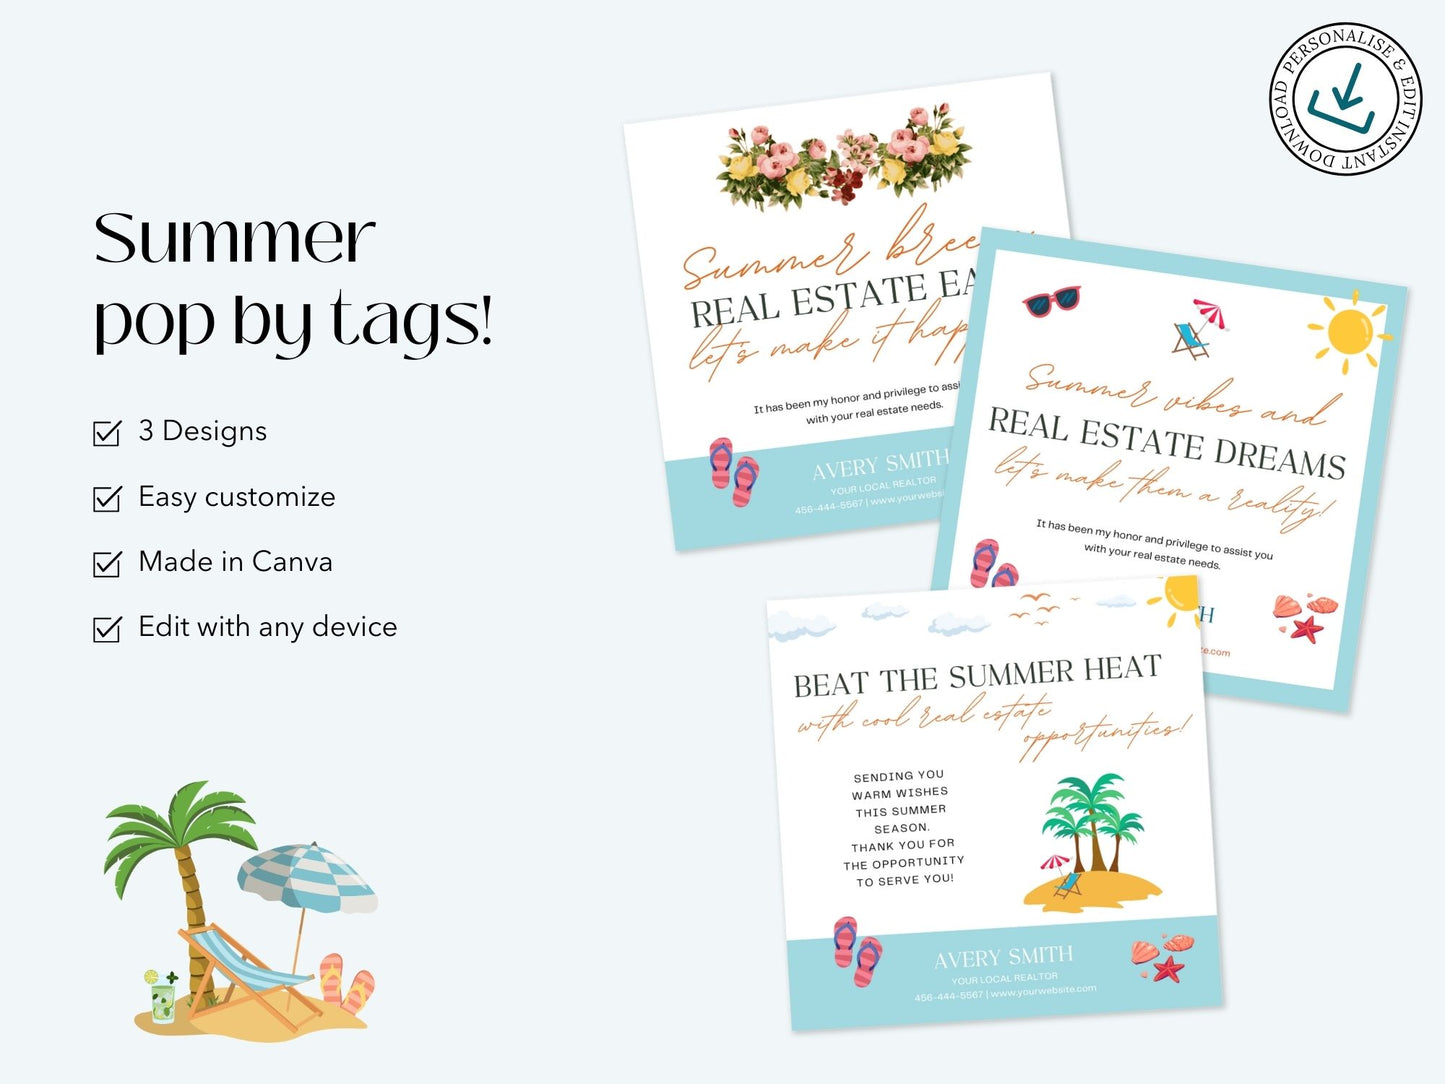 Summer Pop By Tags - Add a personalized touch to your client interactions during the sunny season with our vibrant tags.